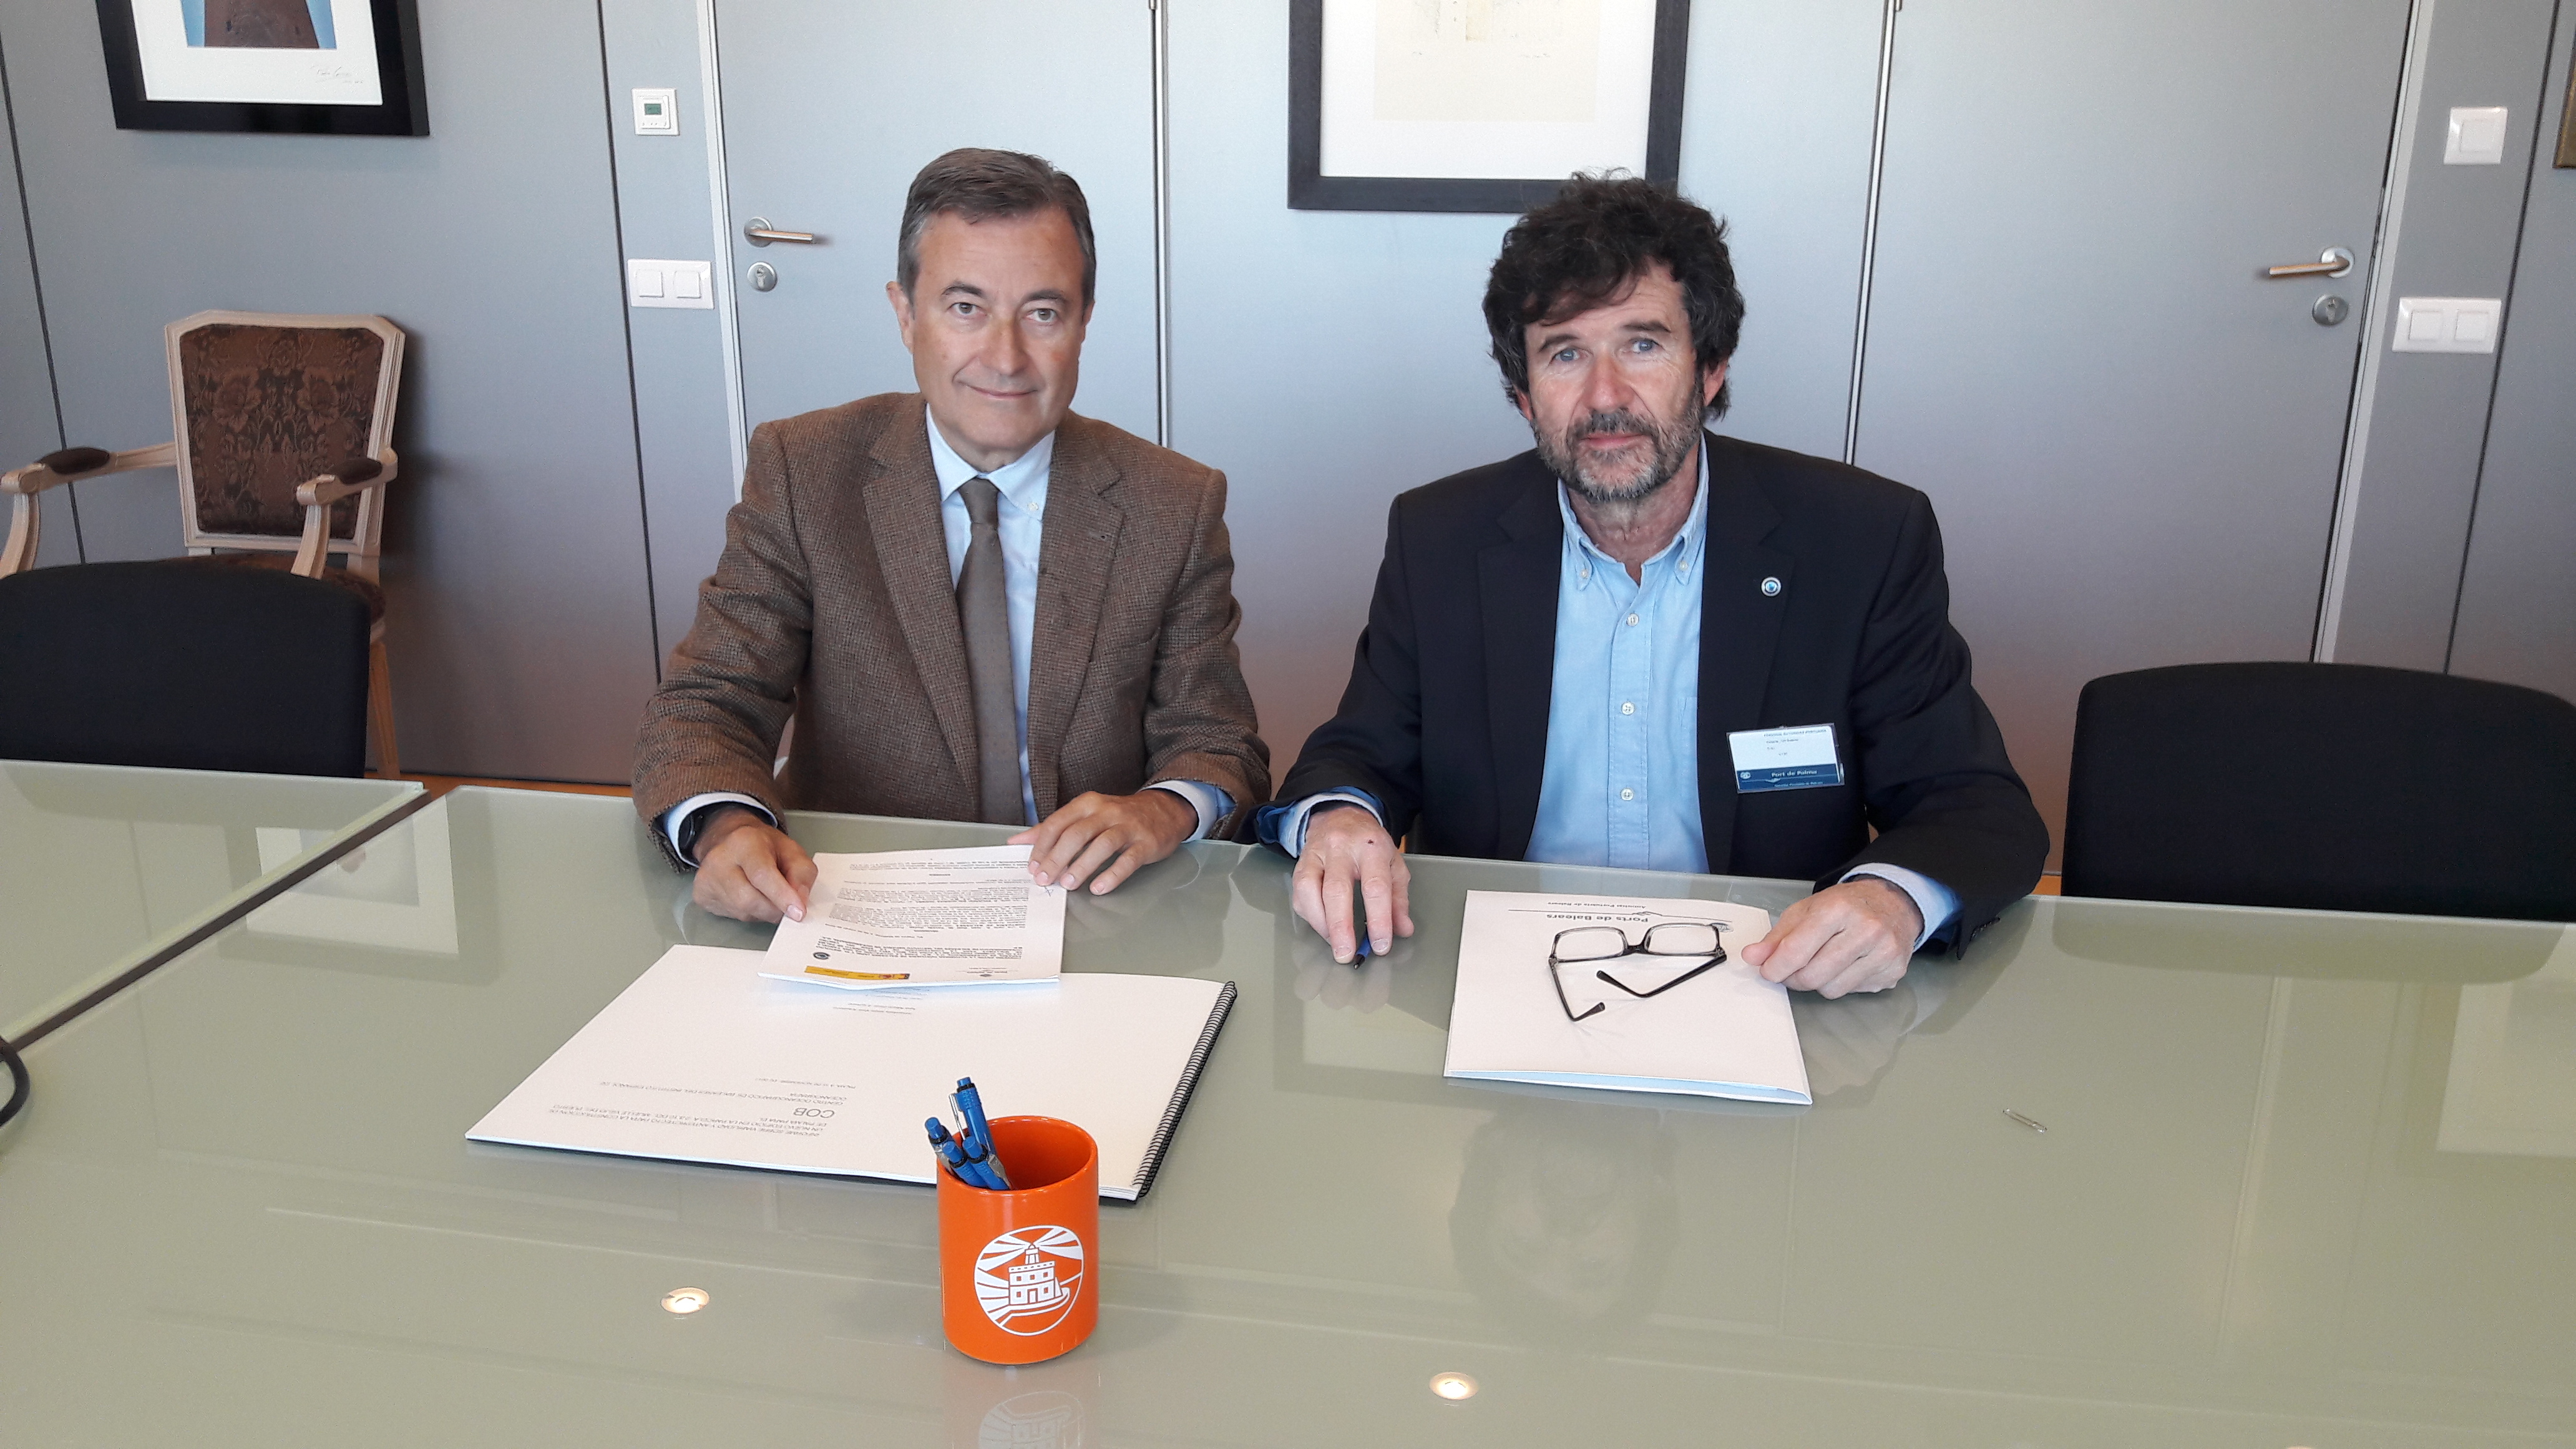 THE PORT AUTHORITY OF THE BALEARIC ISLANDS AND THE SPANISH INSTITUTE OF OCEANOGRAPHY SIGN THE AGREEMENT THAT WILL ALLOW THE CONSTRUCTION OF THE NEW IEO HEADQUARTERS IN THE PORT OF PALMA